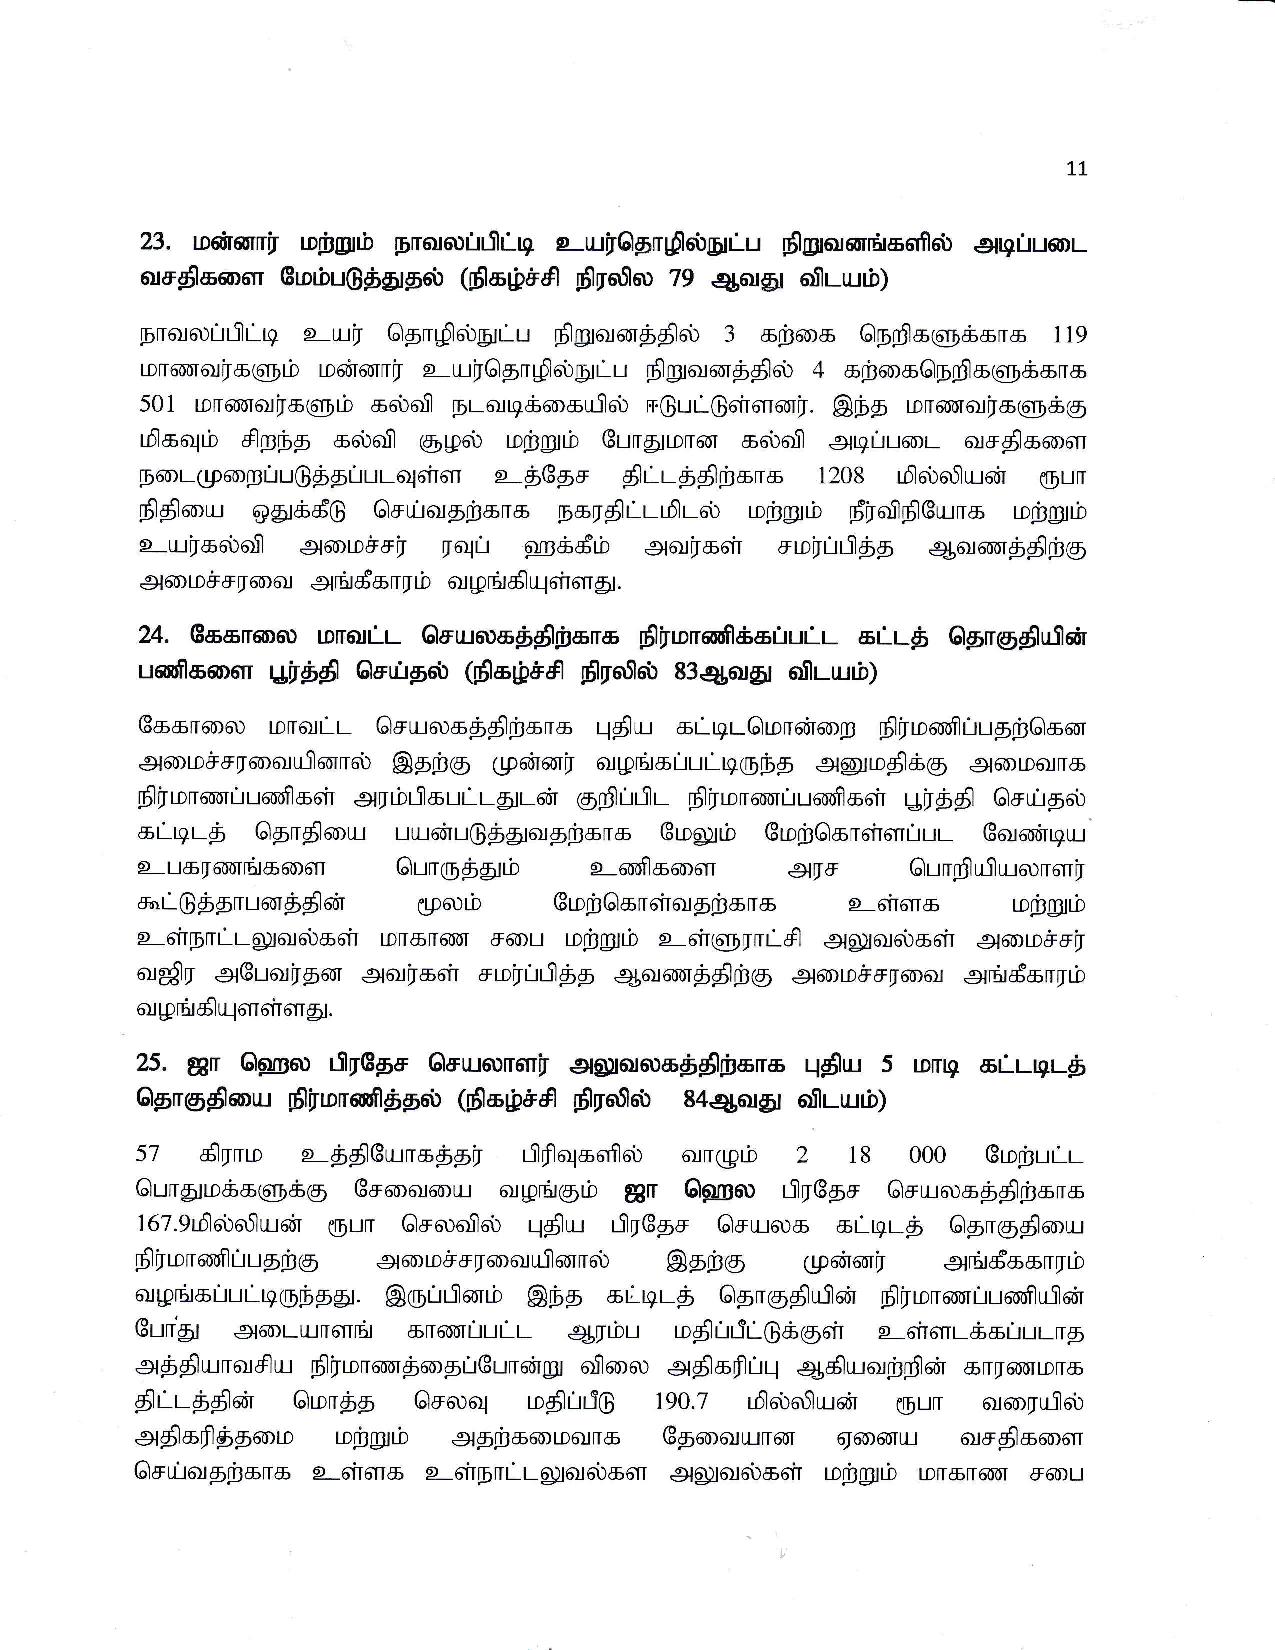 Cabinet Decision on 30.04.2019 T page 011